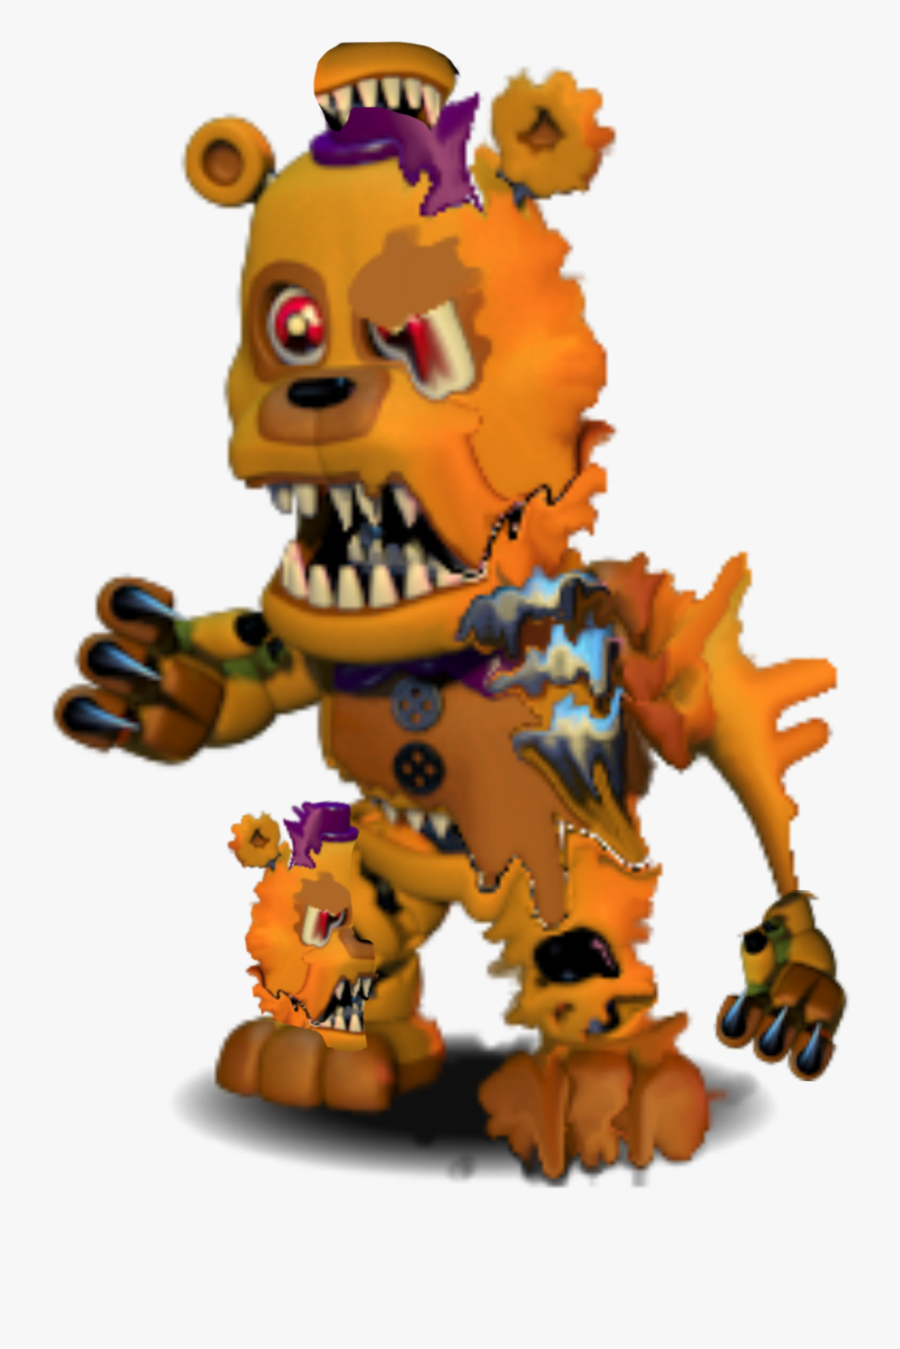 #freetoedit Twisted Adventure Nightmare Fredbear - Fredbear Sing Whip And Nae Nae, Transparent Clipart